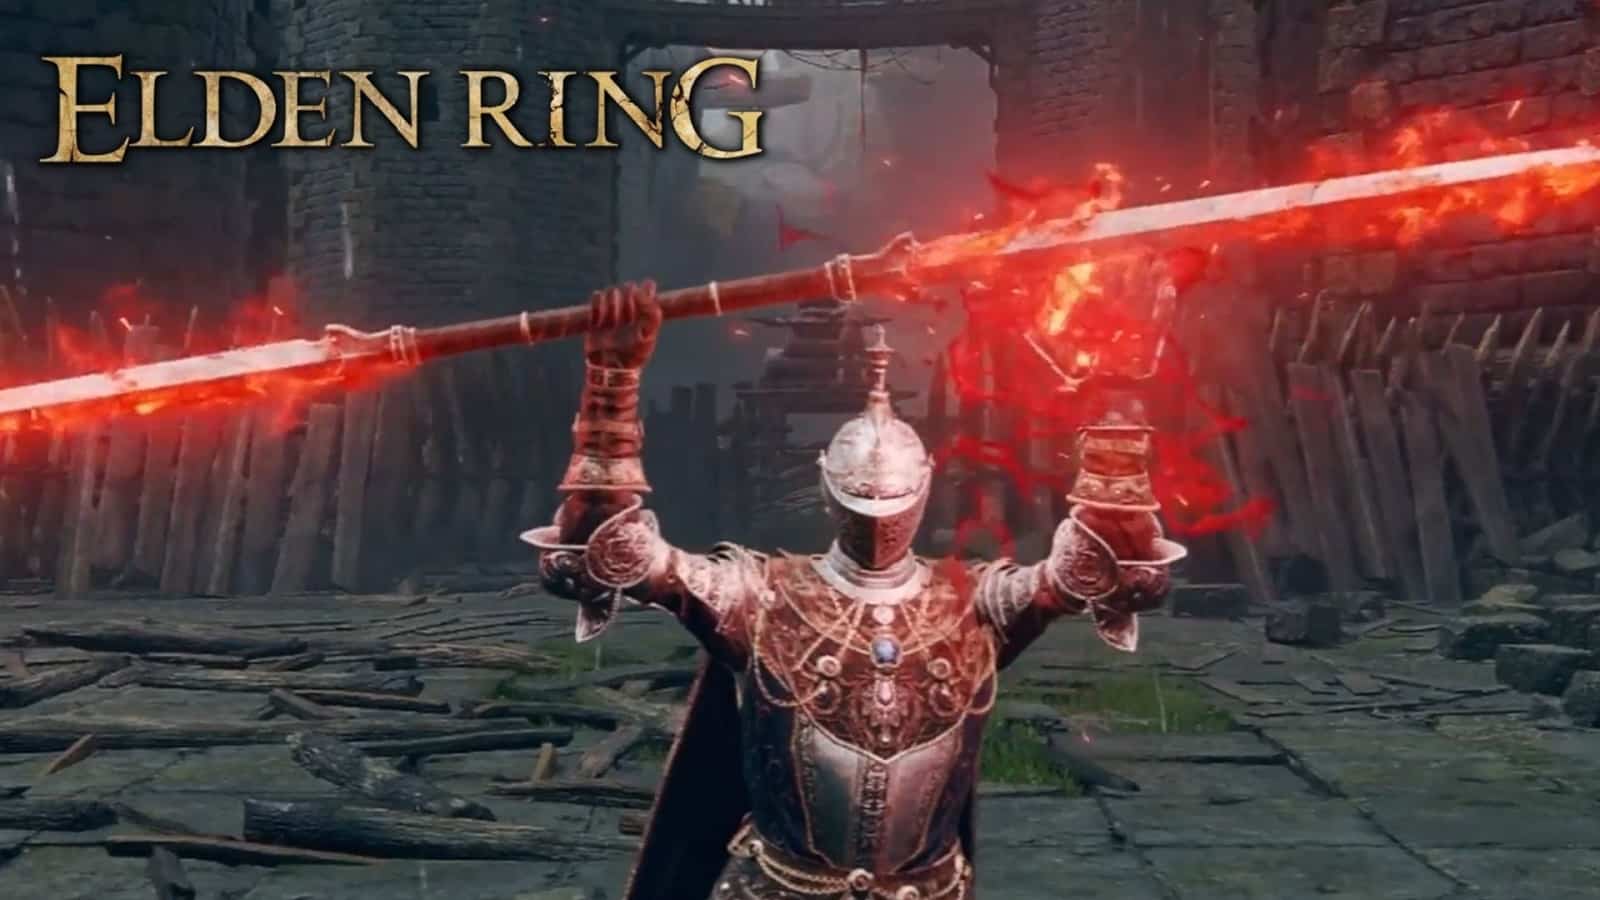 Elden Ring character holding a Twinblade